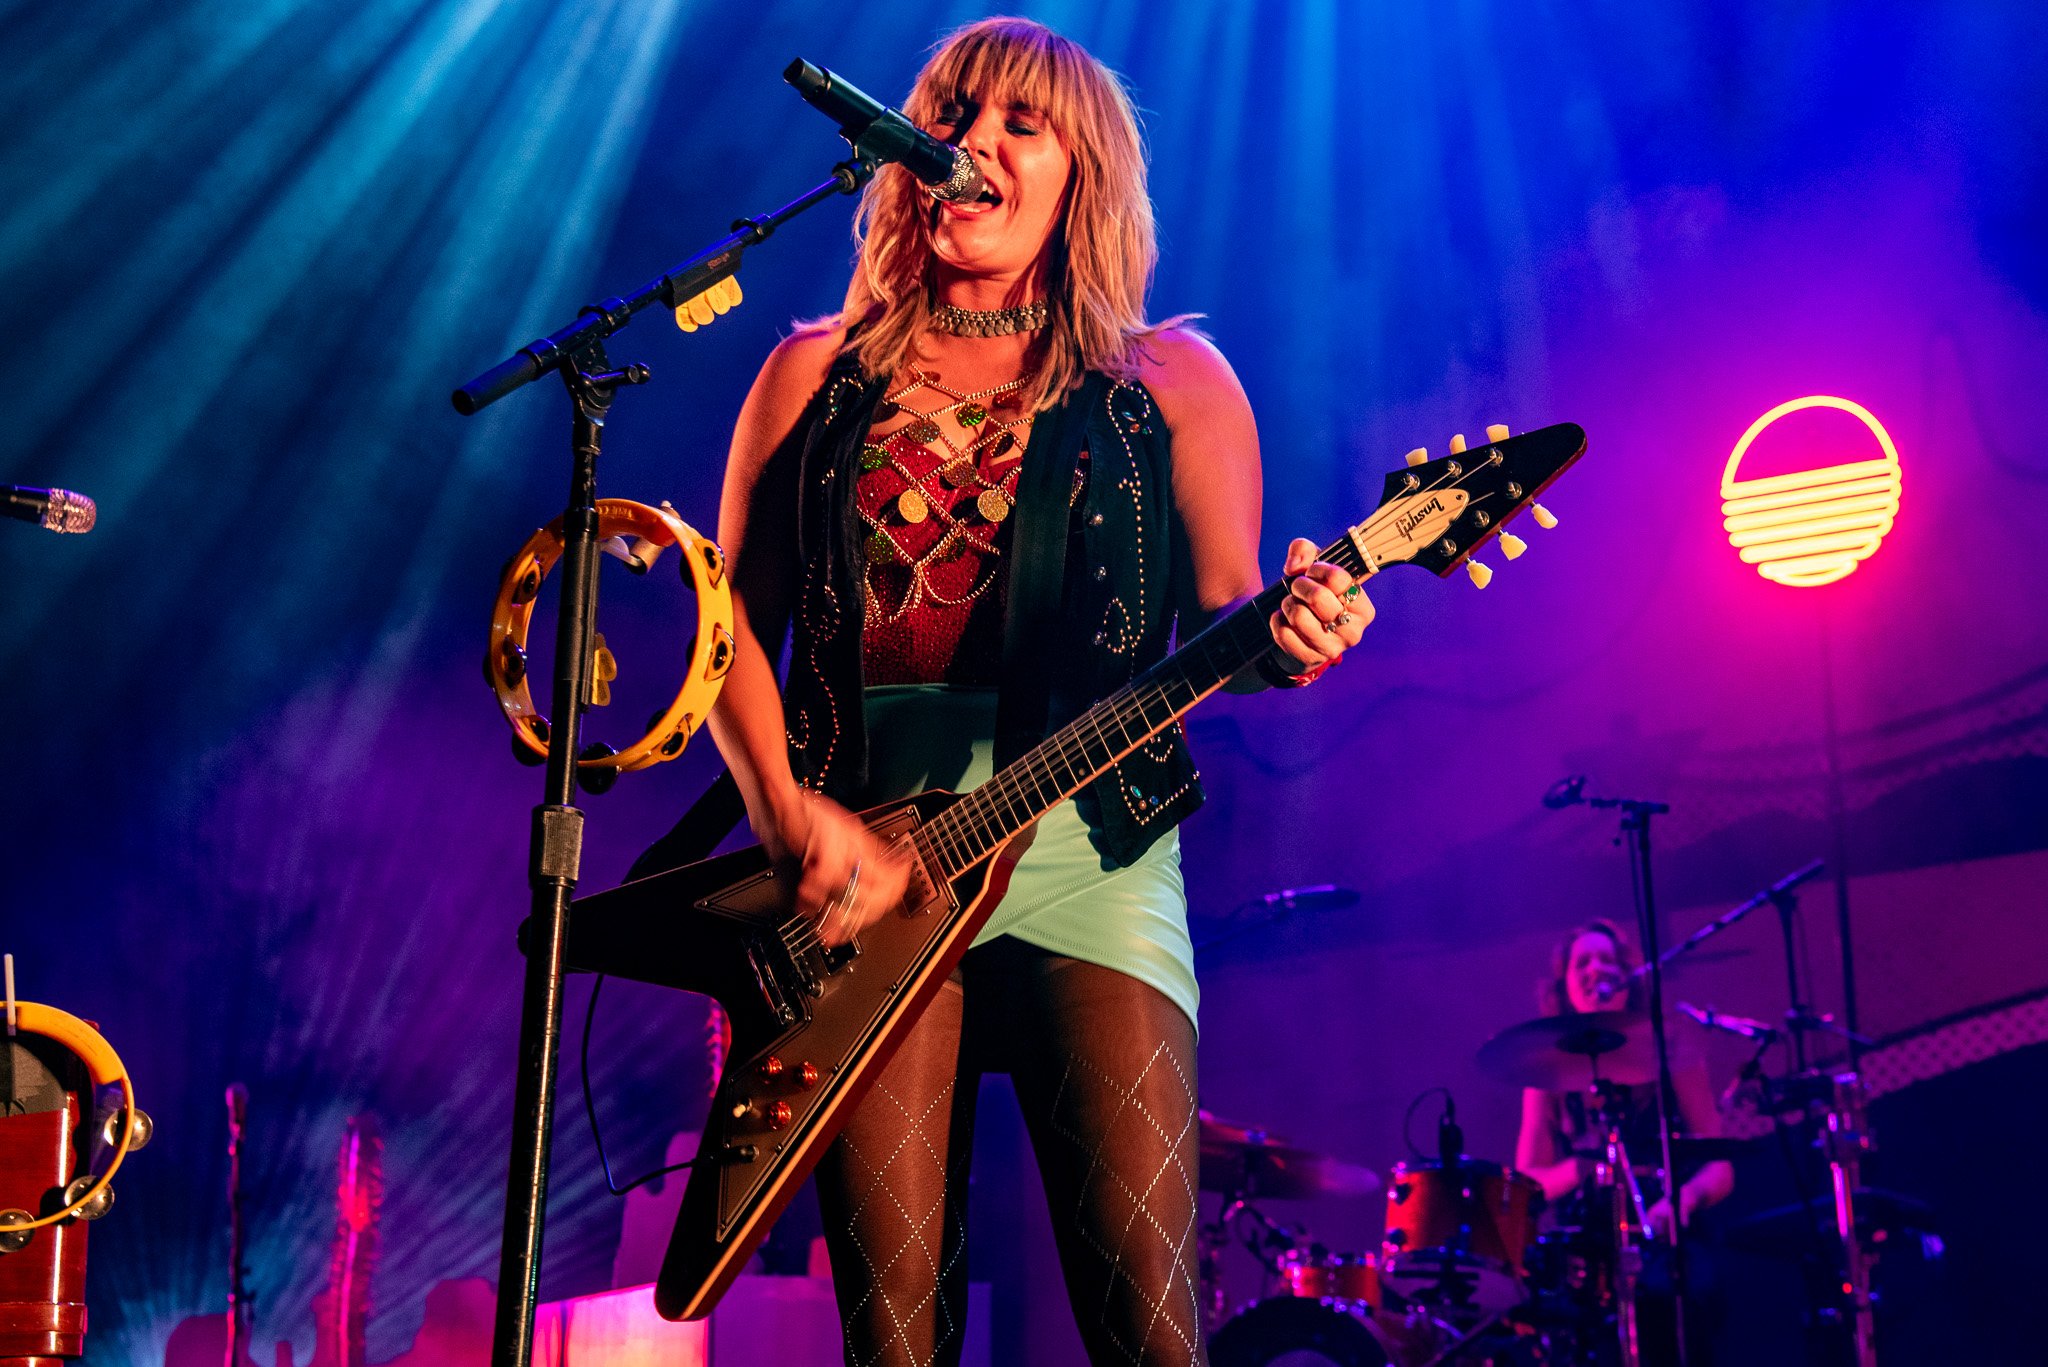  Grace Potter opens her show with “Lady Vagabond” from her newest album,  Mother Road.&nbsp;  